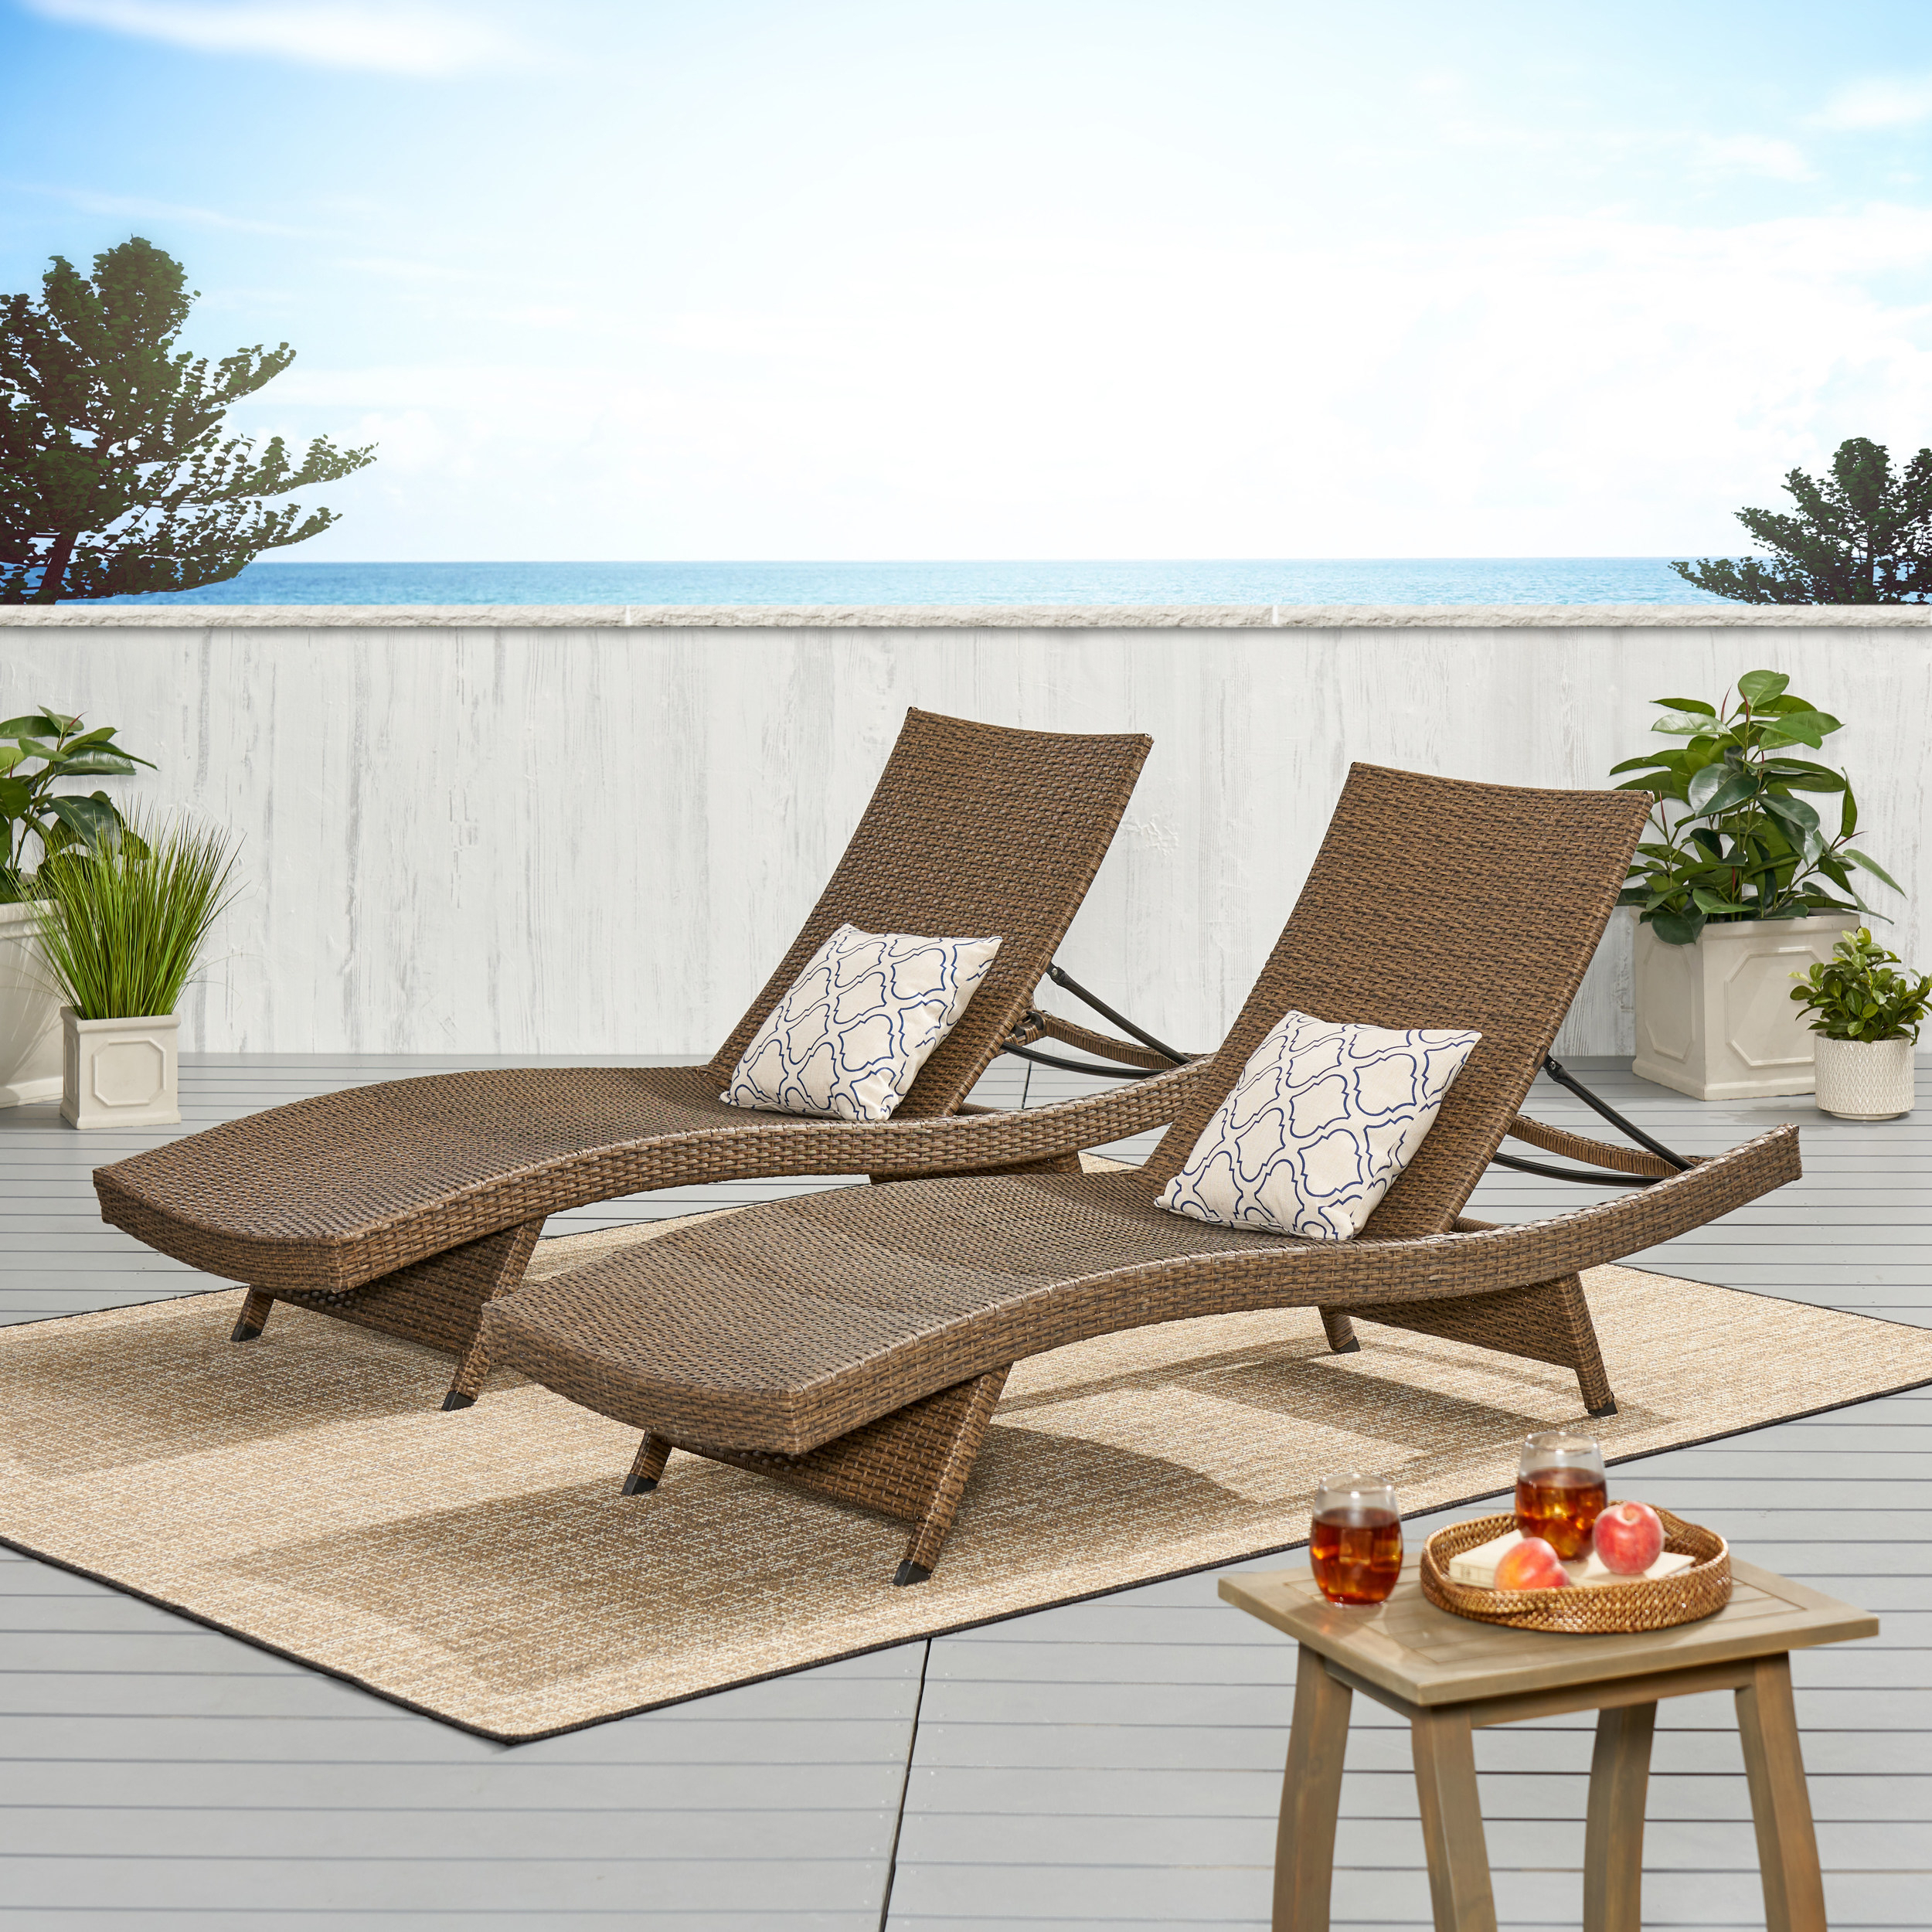 Lakeport Outdoor Mixed Mocha Wicker Armless Chaise Lounge (Set Of 2) - Wicker, Set Of 2